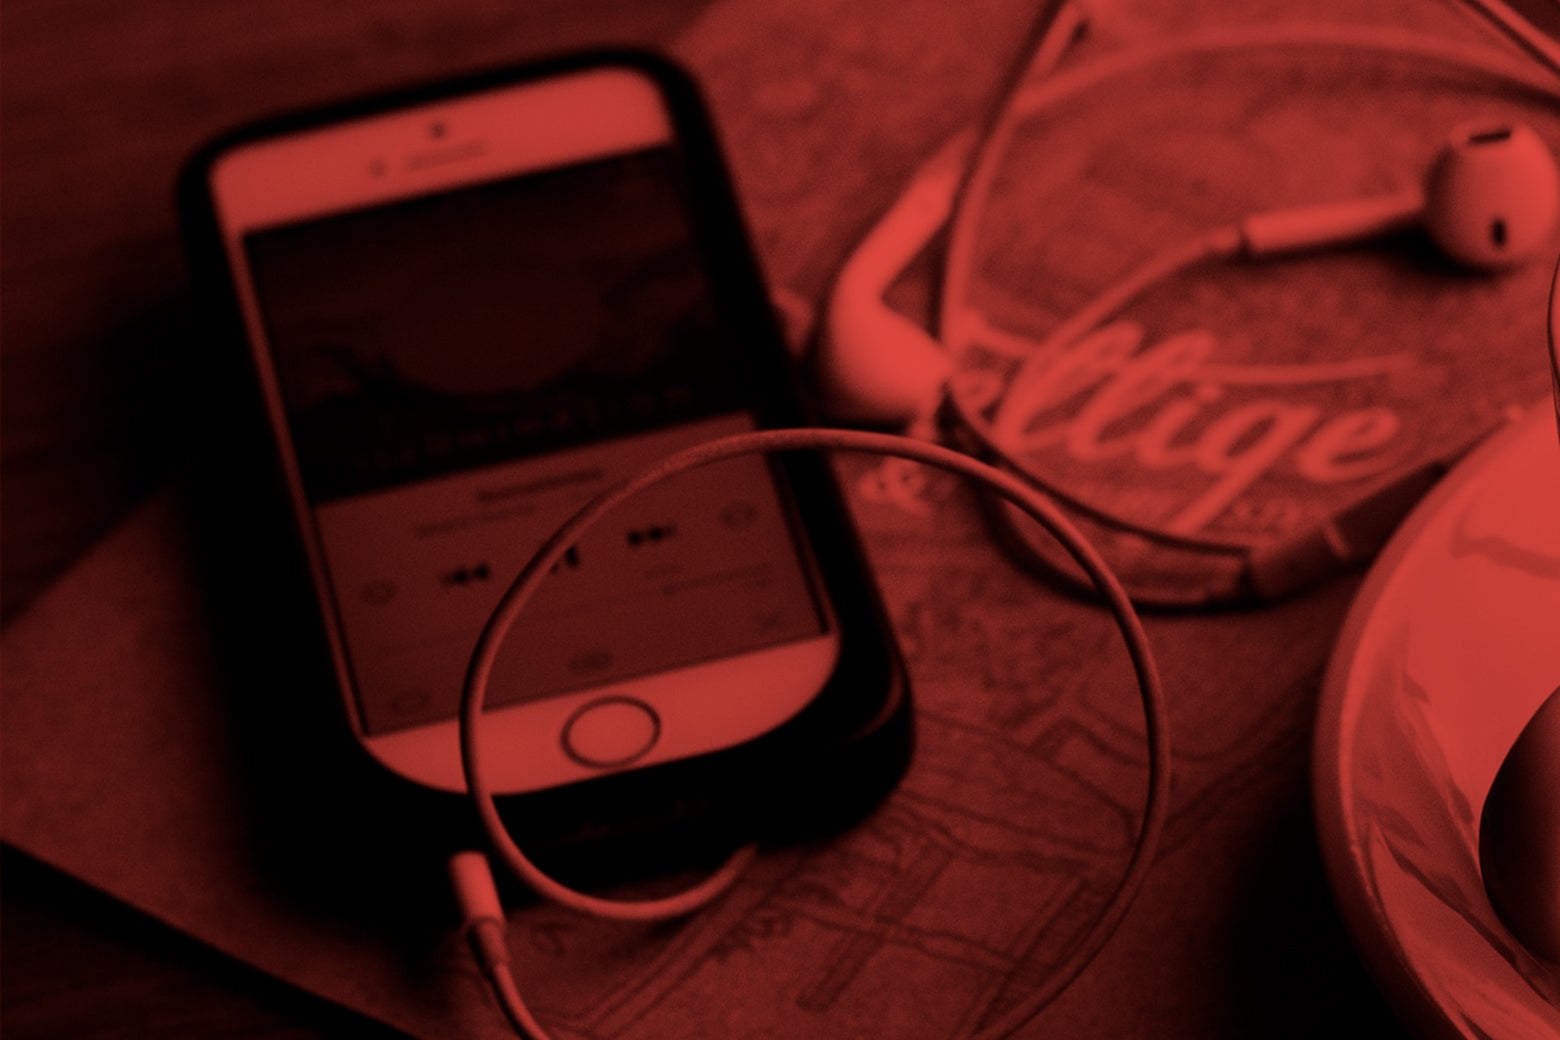 A blood-red-tinted image of an iPhone, headphones in, playing a podcast.